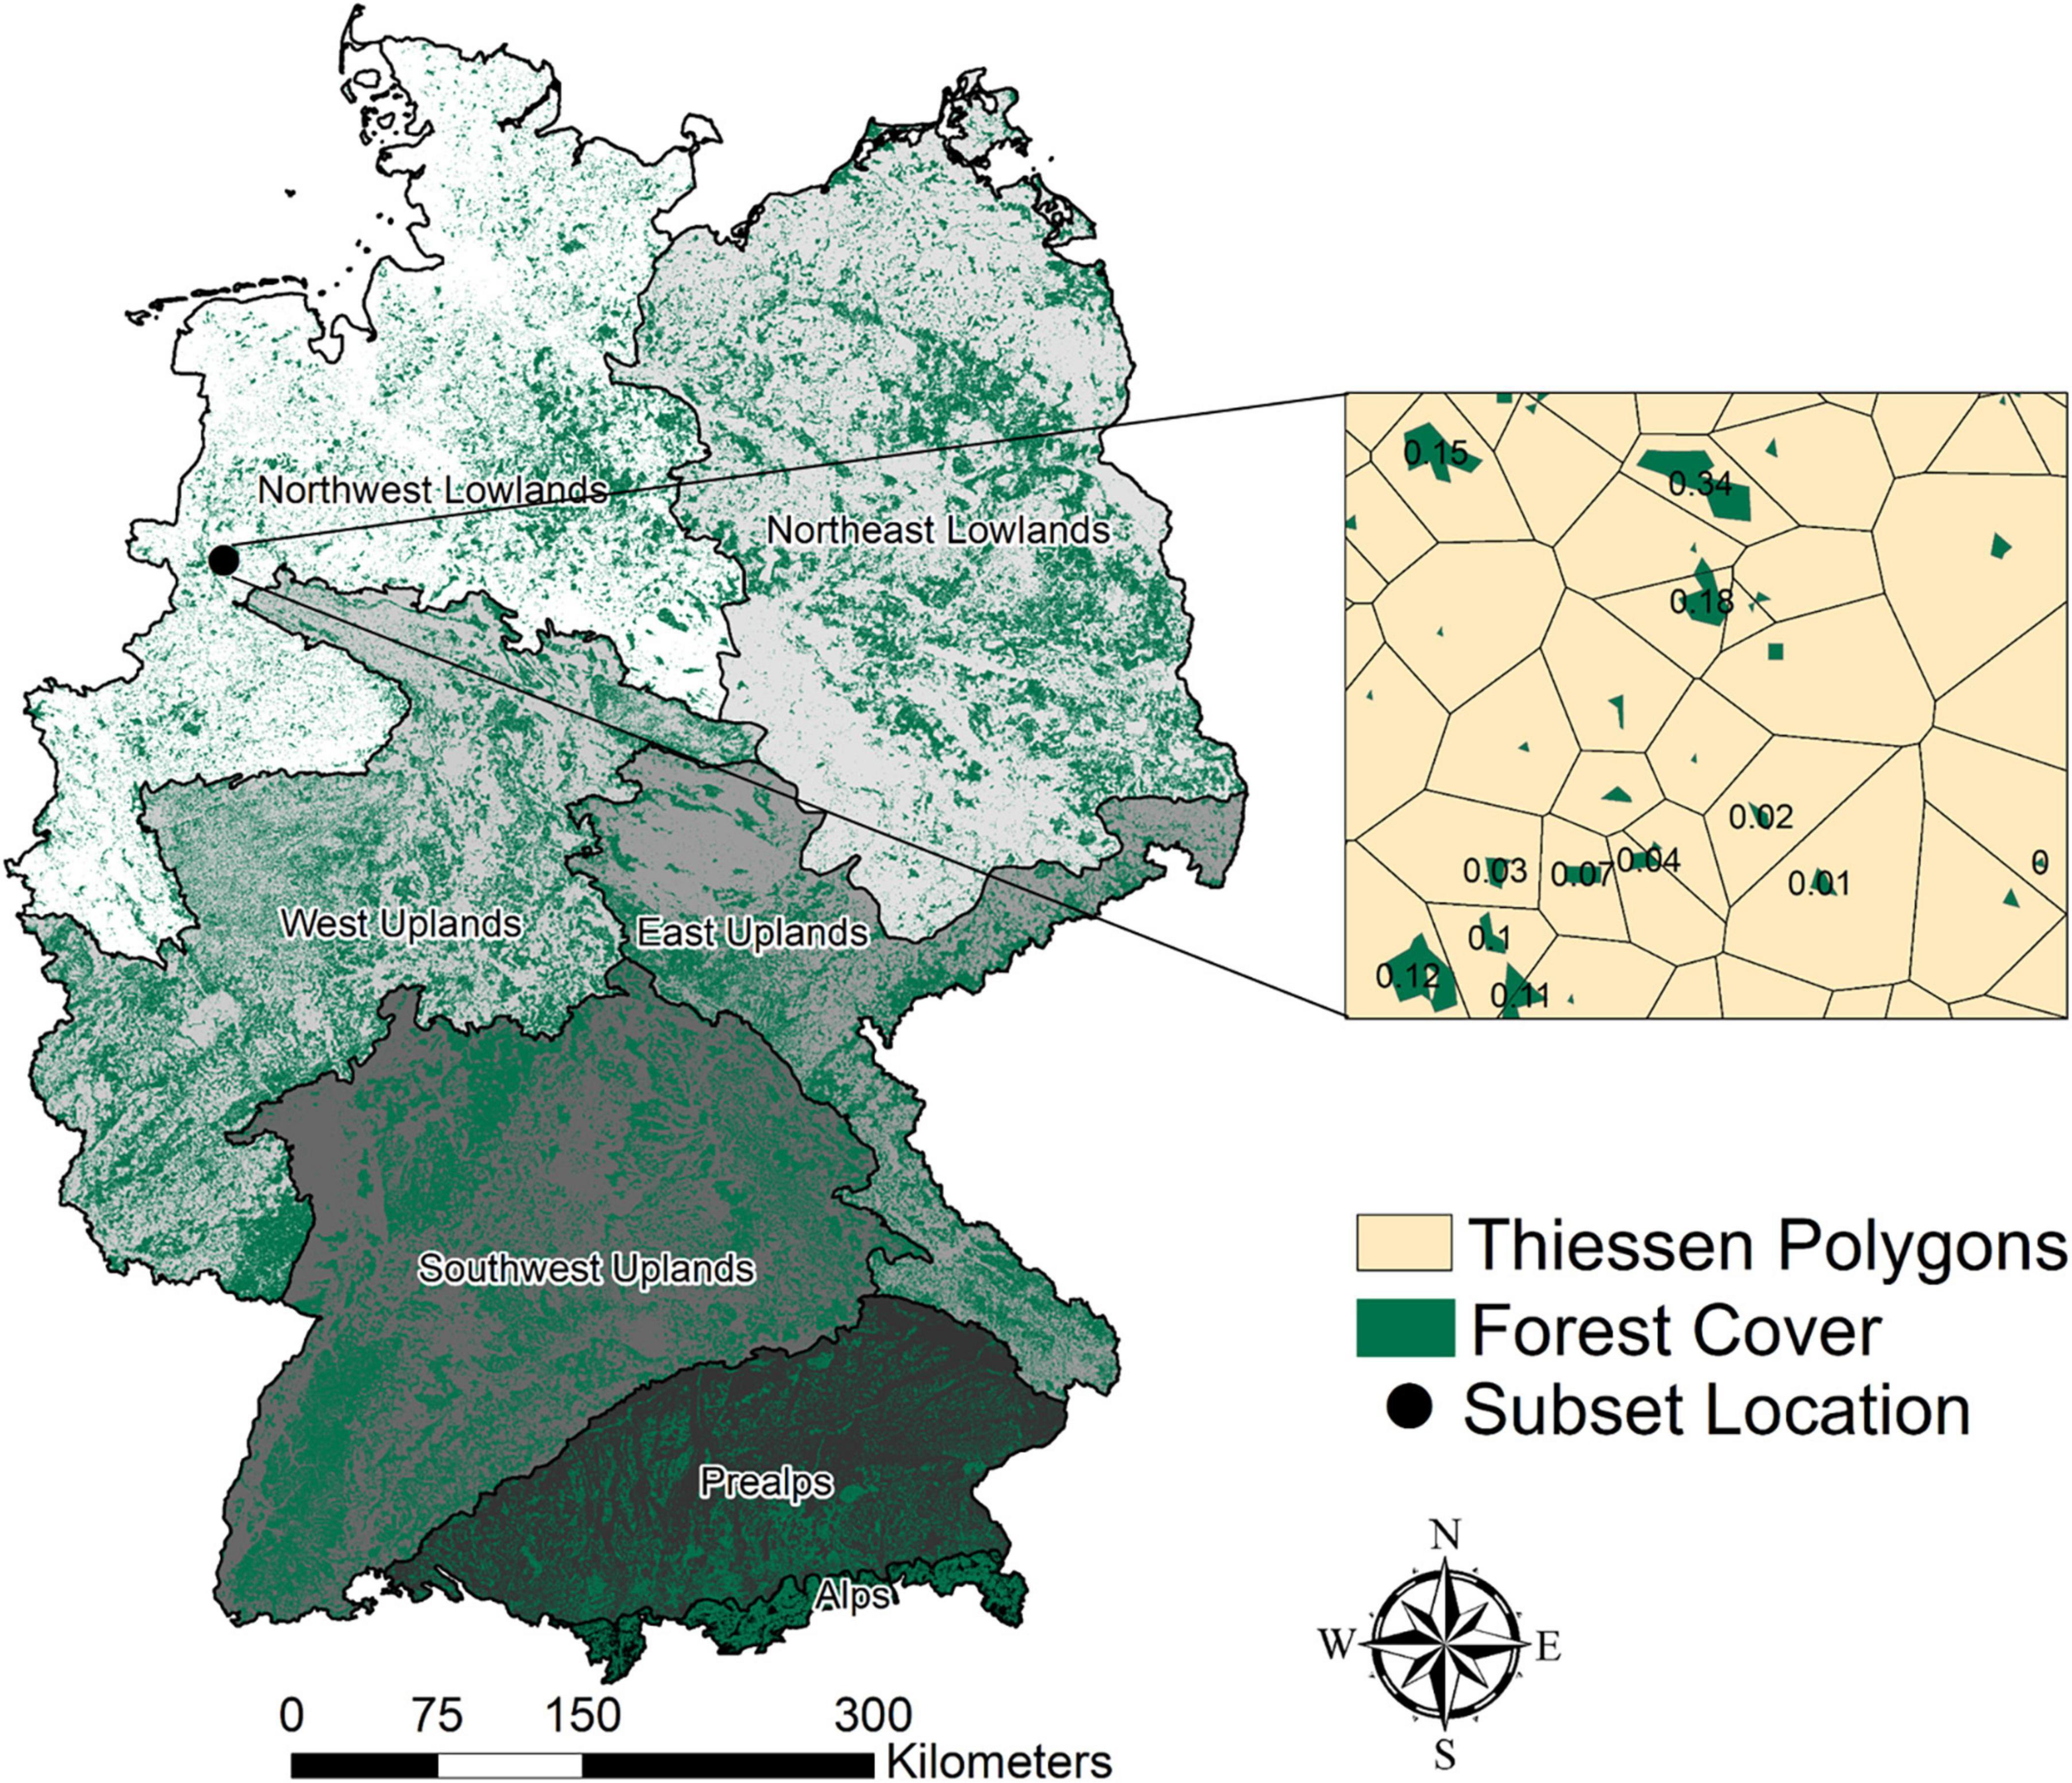 Anthropogenic modification of forests means only 40% of remaining forests  have high ecosystem integrity